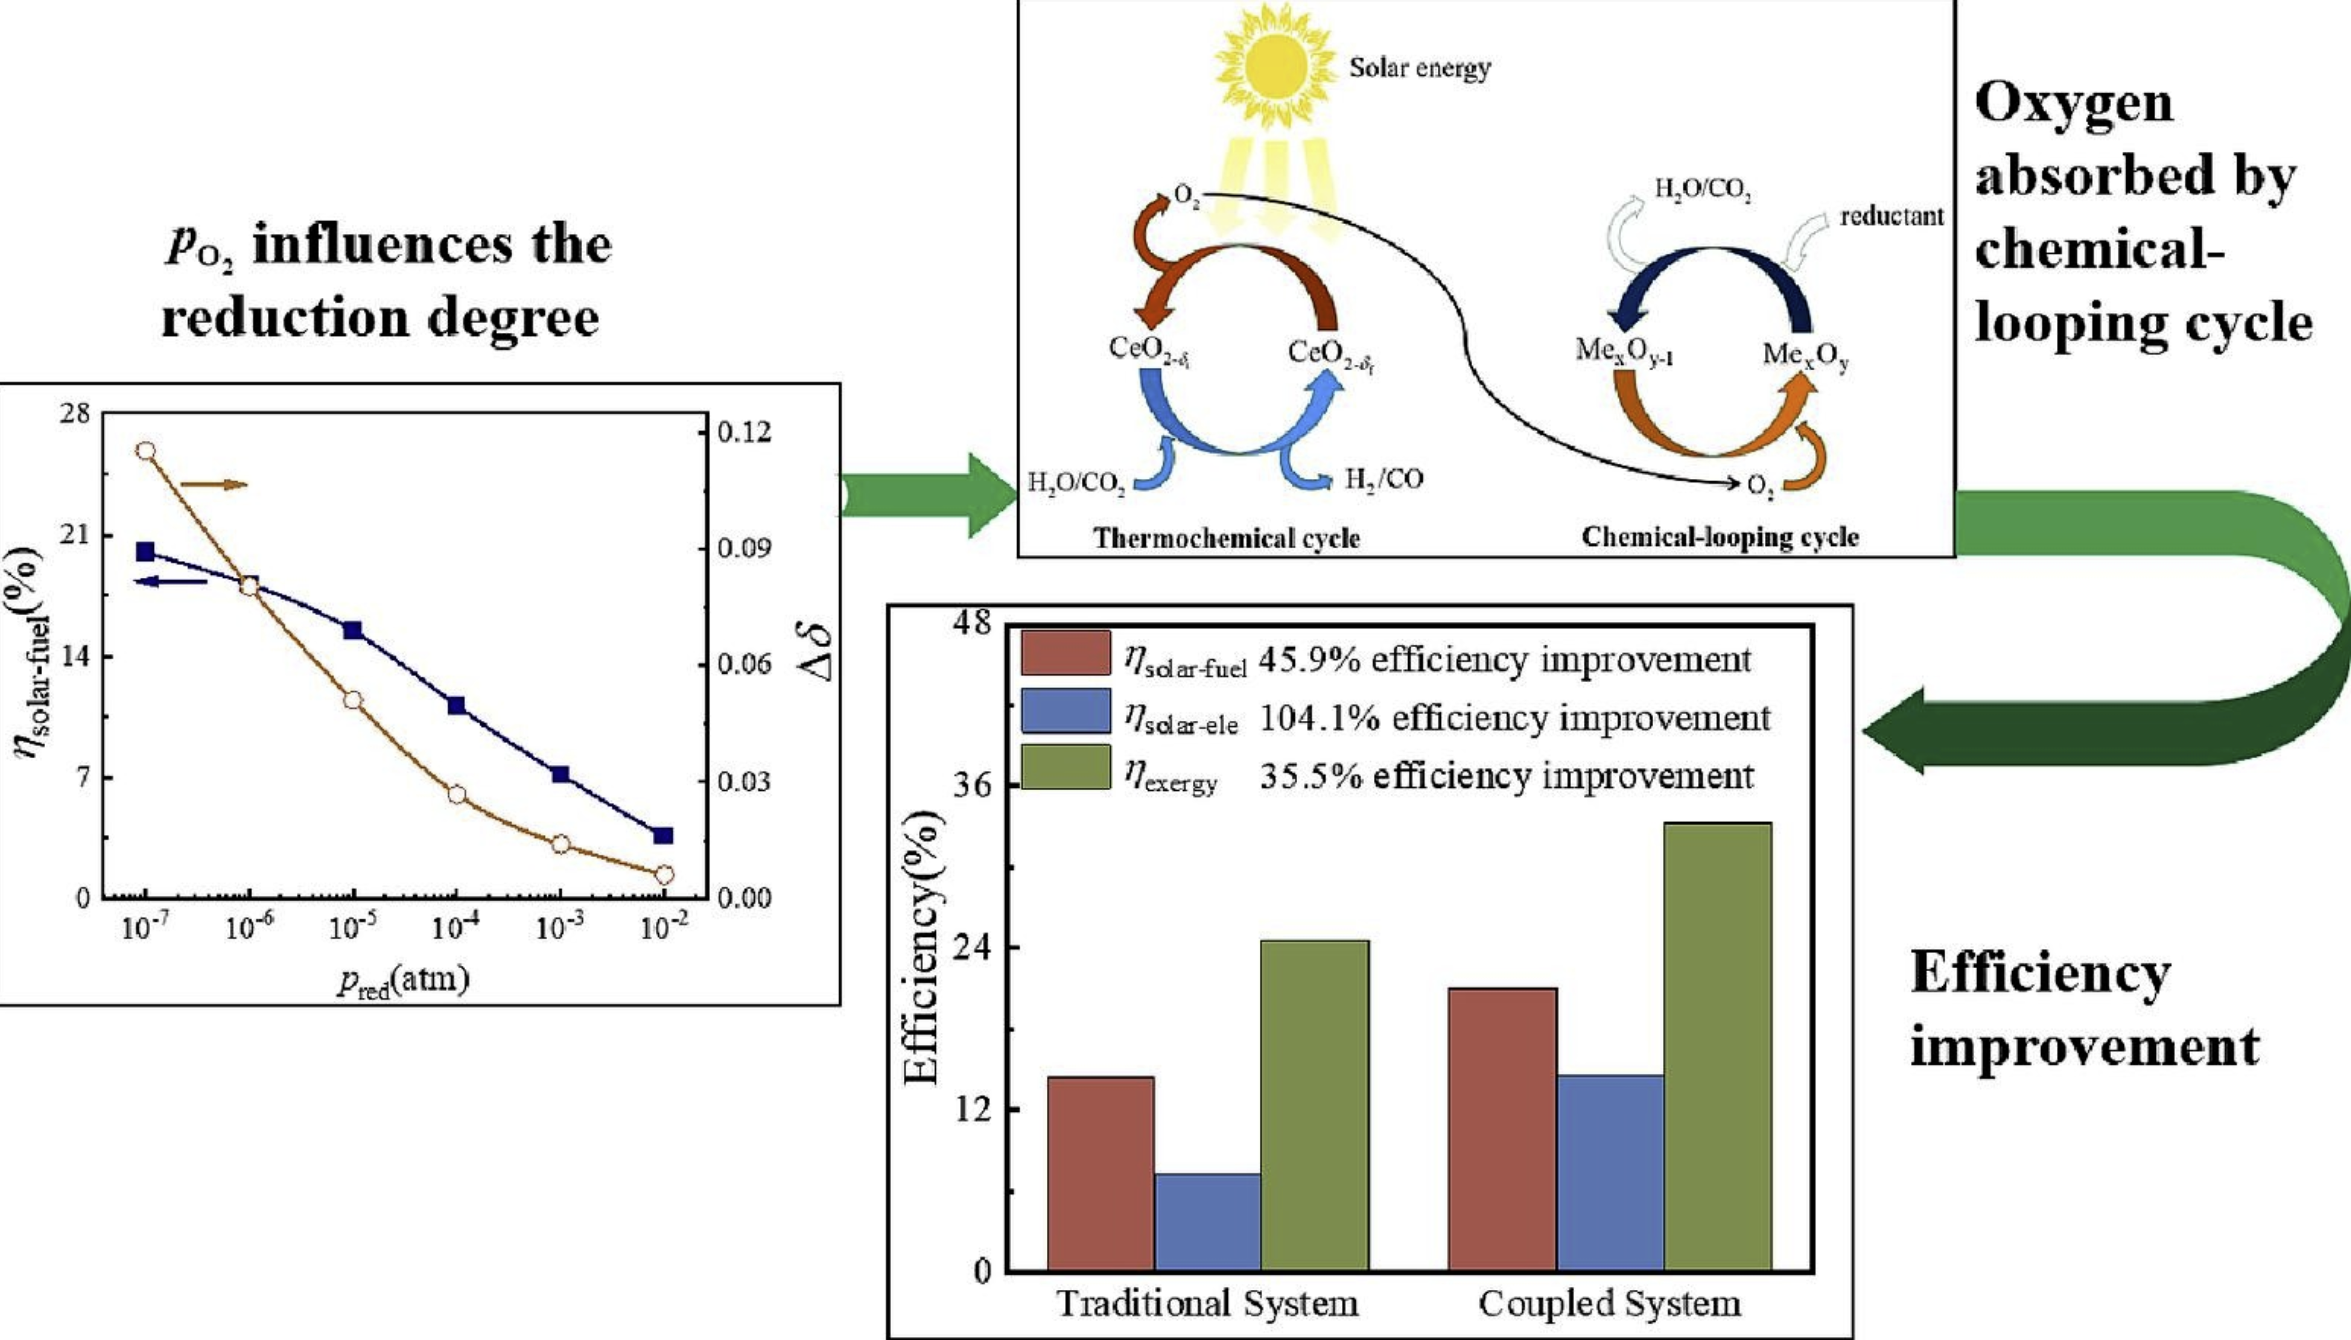 Published at Applied Energy – A novel high-efficiency solar thermochemical cycle for fuel production based on chemical-looping cycle oxygen removal